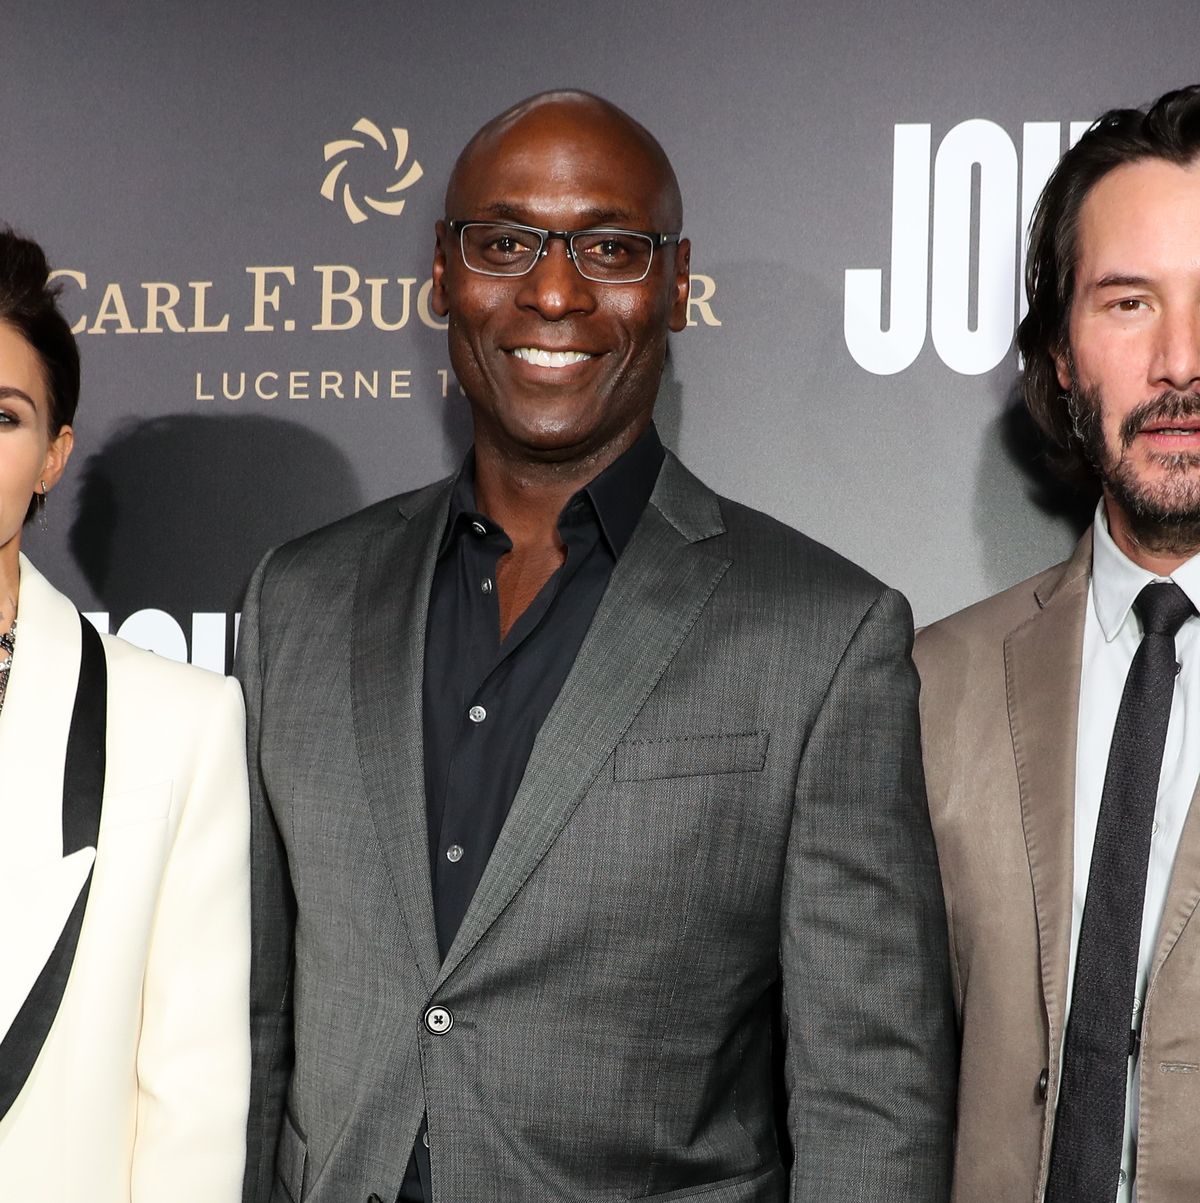 John Wick 4's Keanu Reeves pays emotional tribute to late co-star